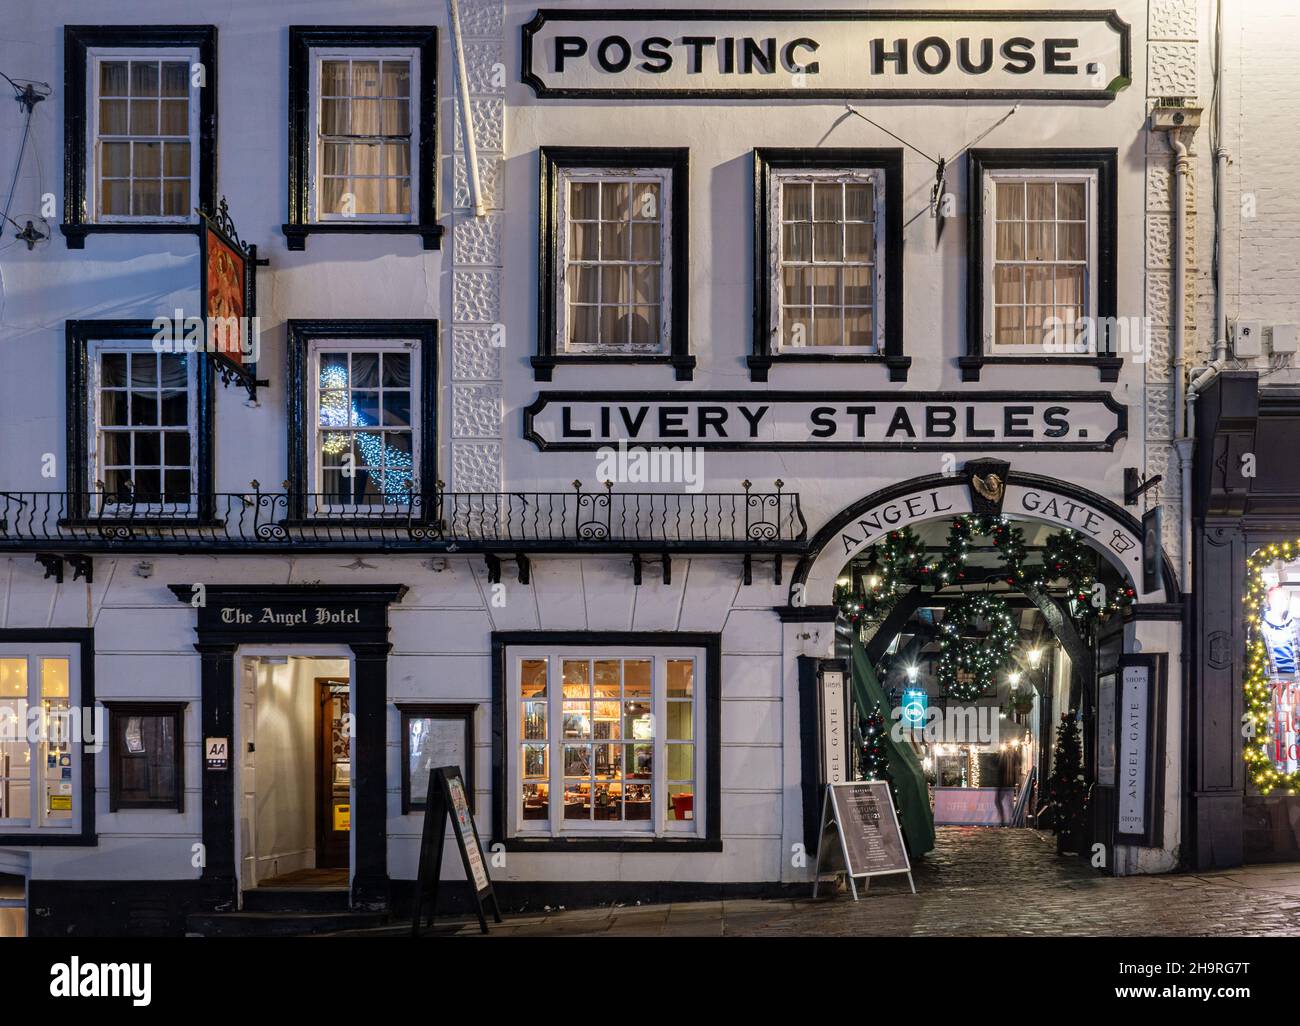 The Angel Hotel, former posting house livery stables, historic building on Guildford High Street decorated at Christmas, Surrey UK, with Angel Gate Stock Photo